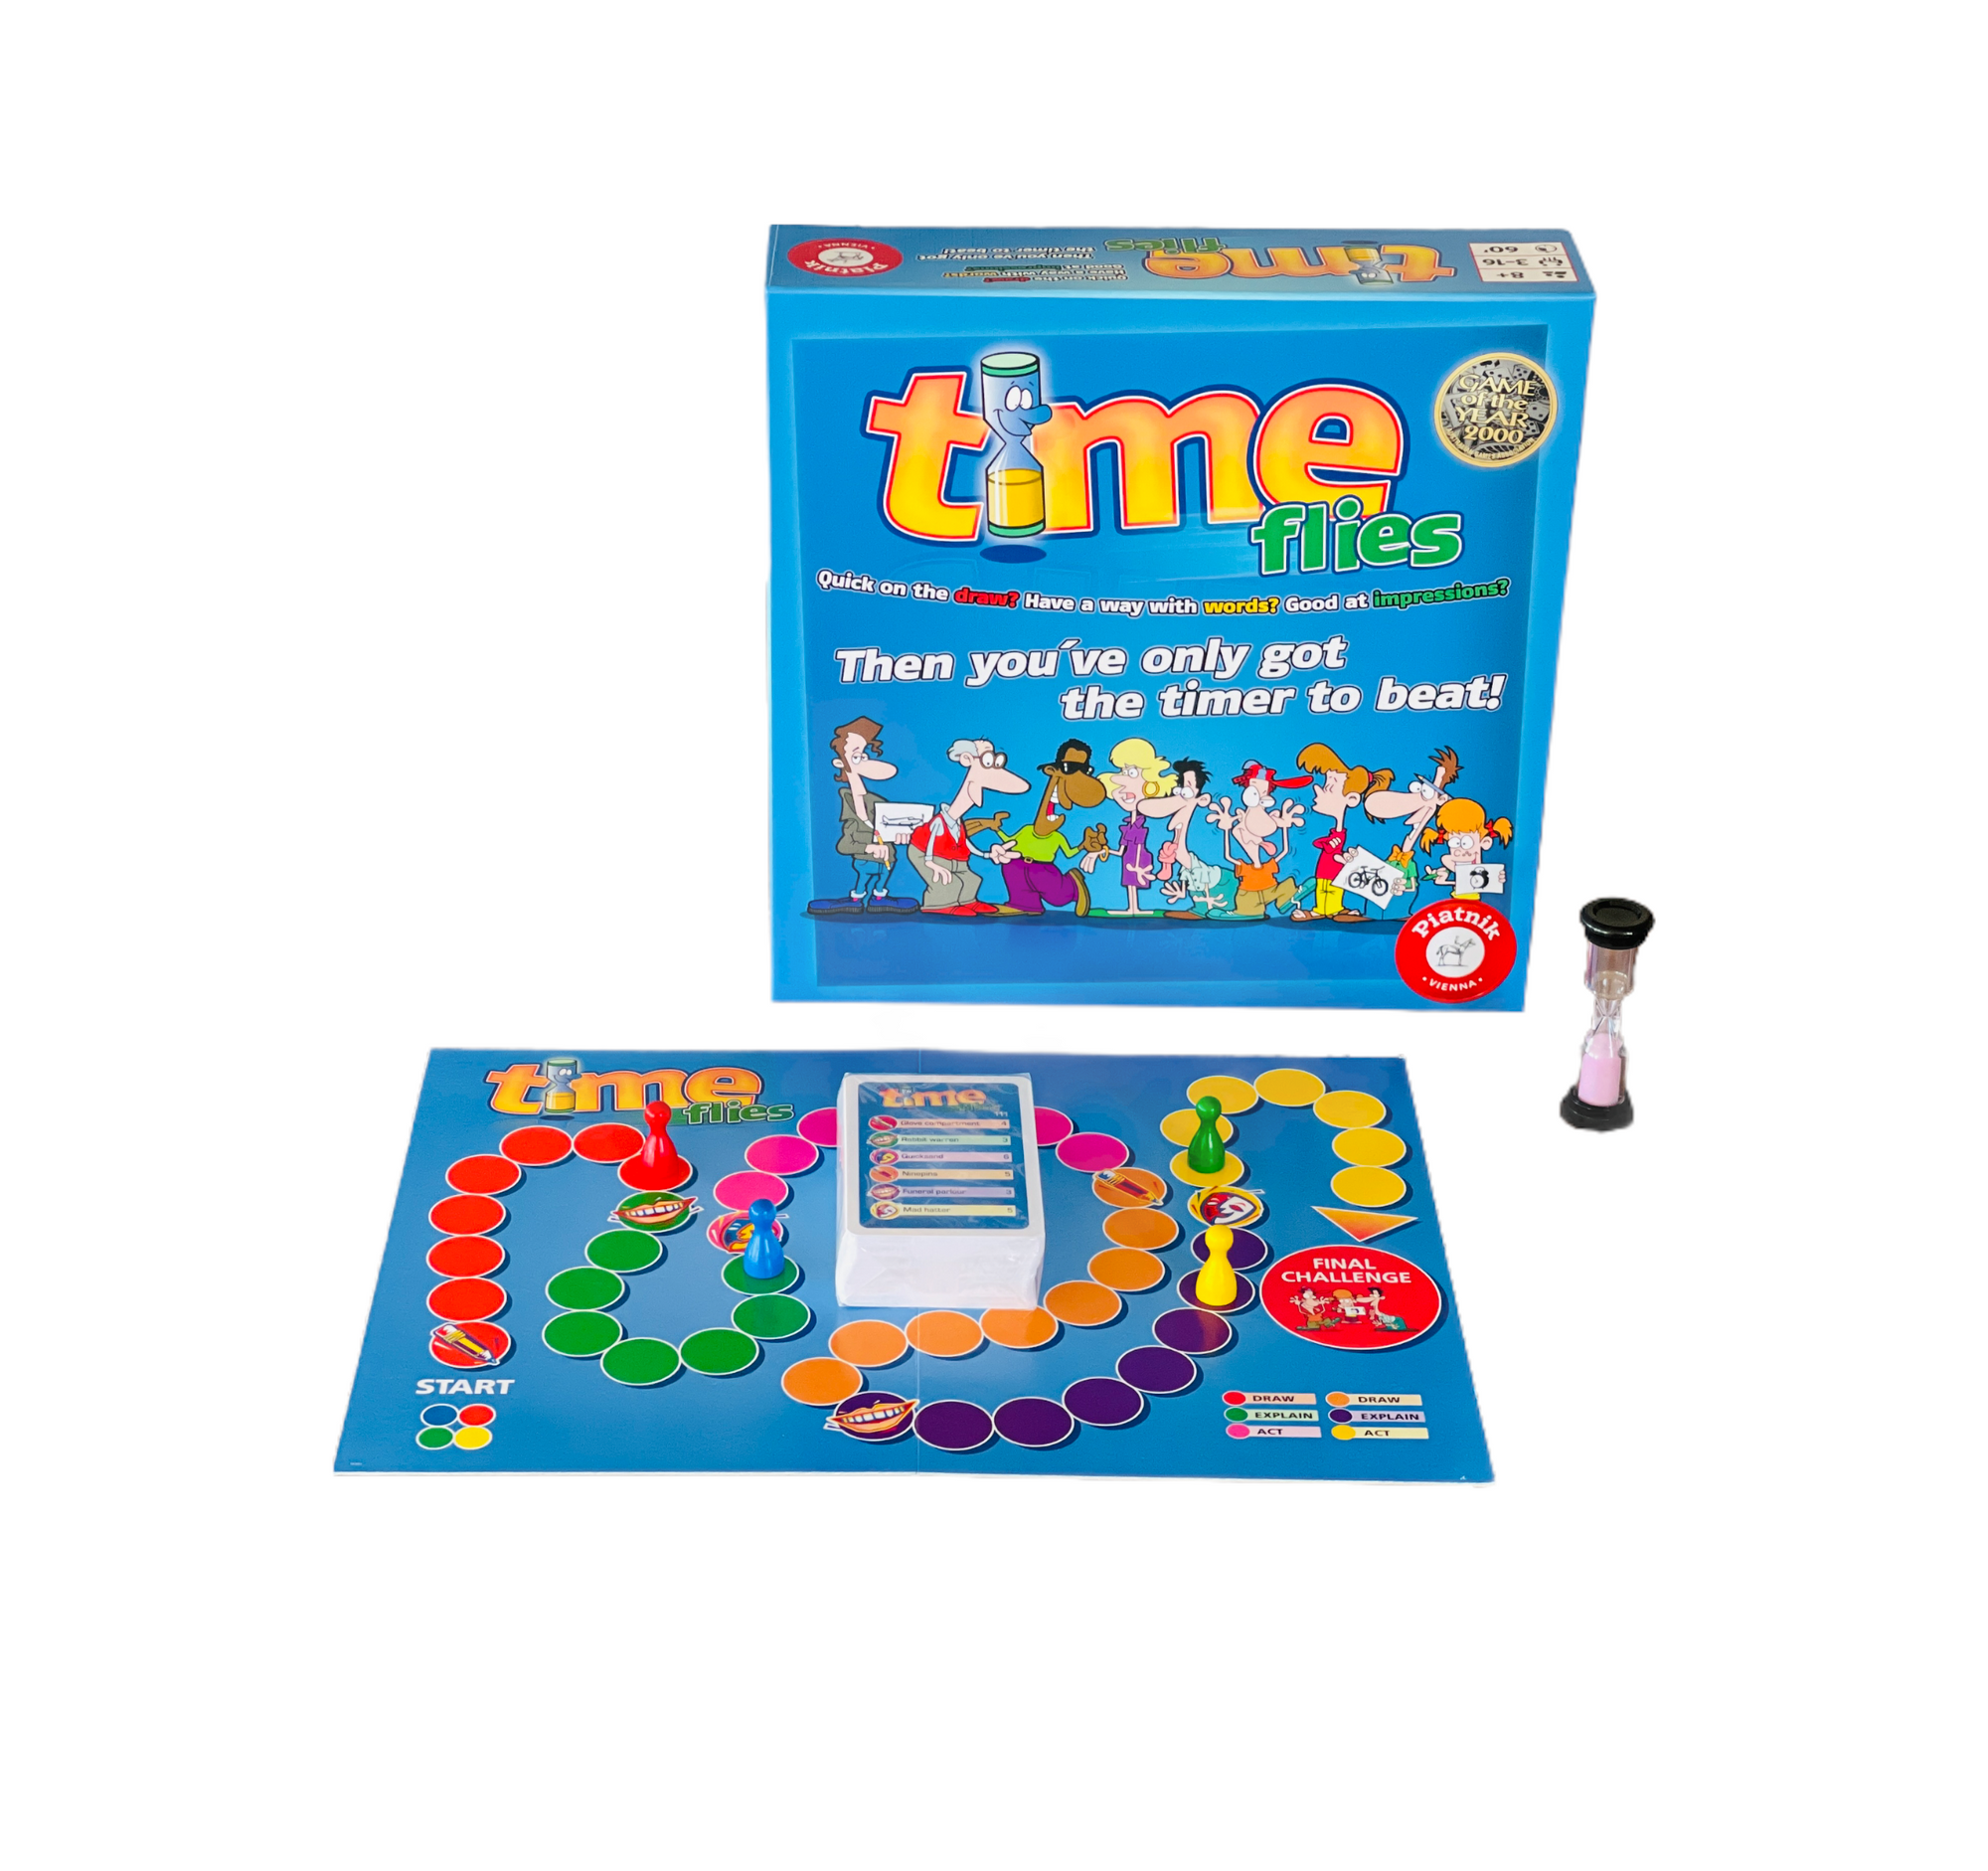 Time Flies Game blue game board laid out in front of blue packaging box on white background